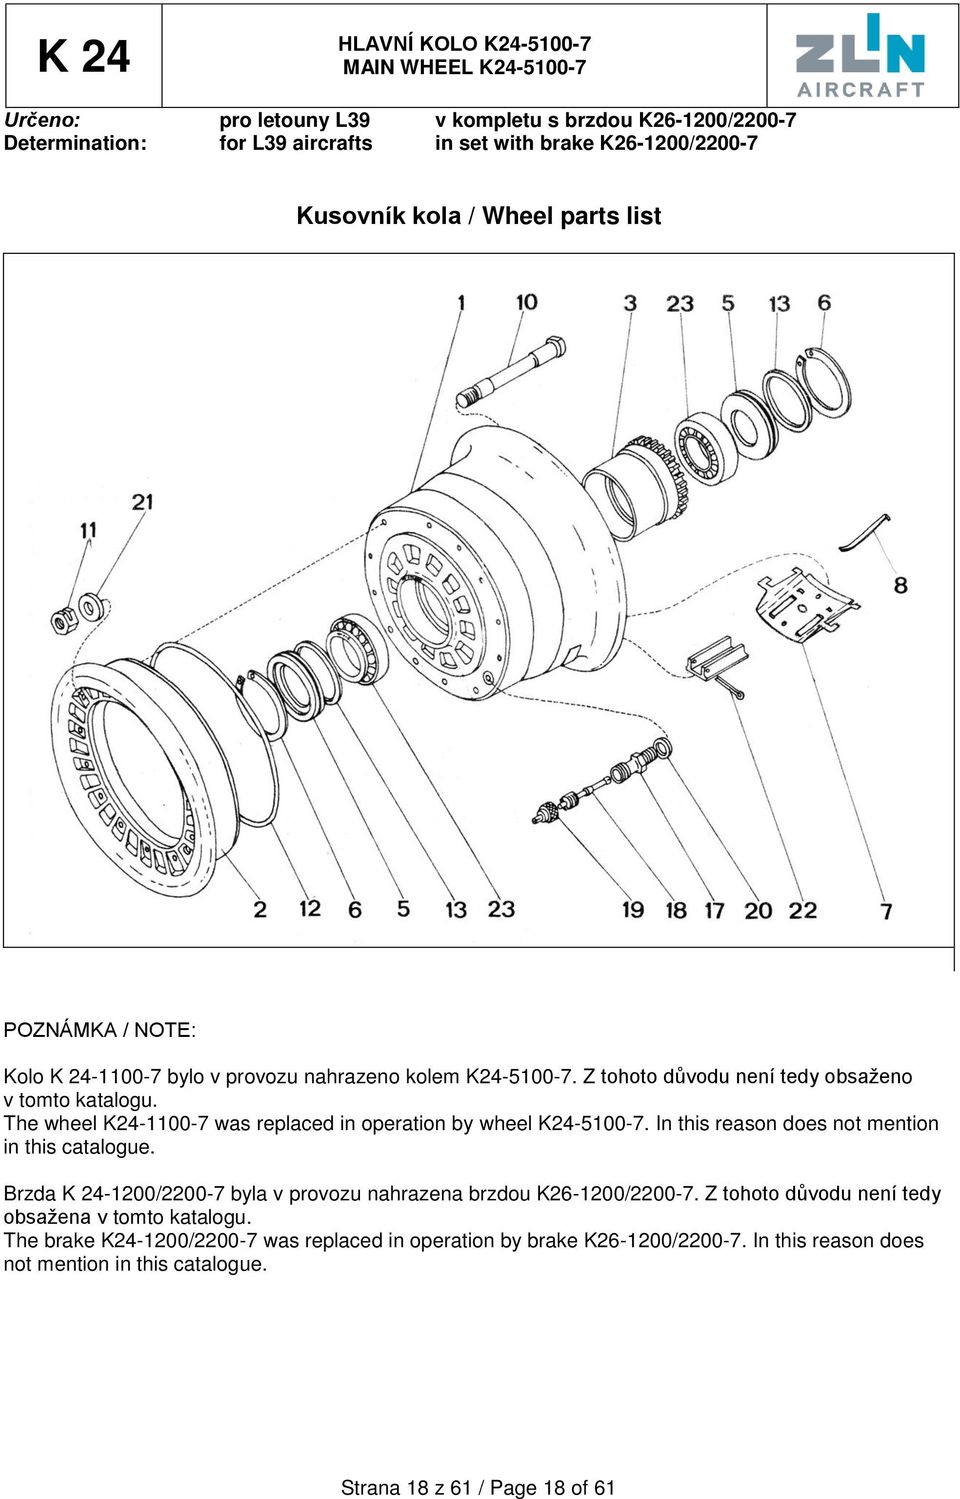 The wheel K24-1100-7 was replaced in operation by wheel K24-5100-7. In this reason does not mention in this catalogue.